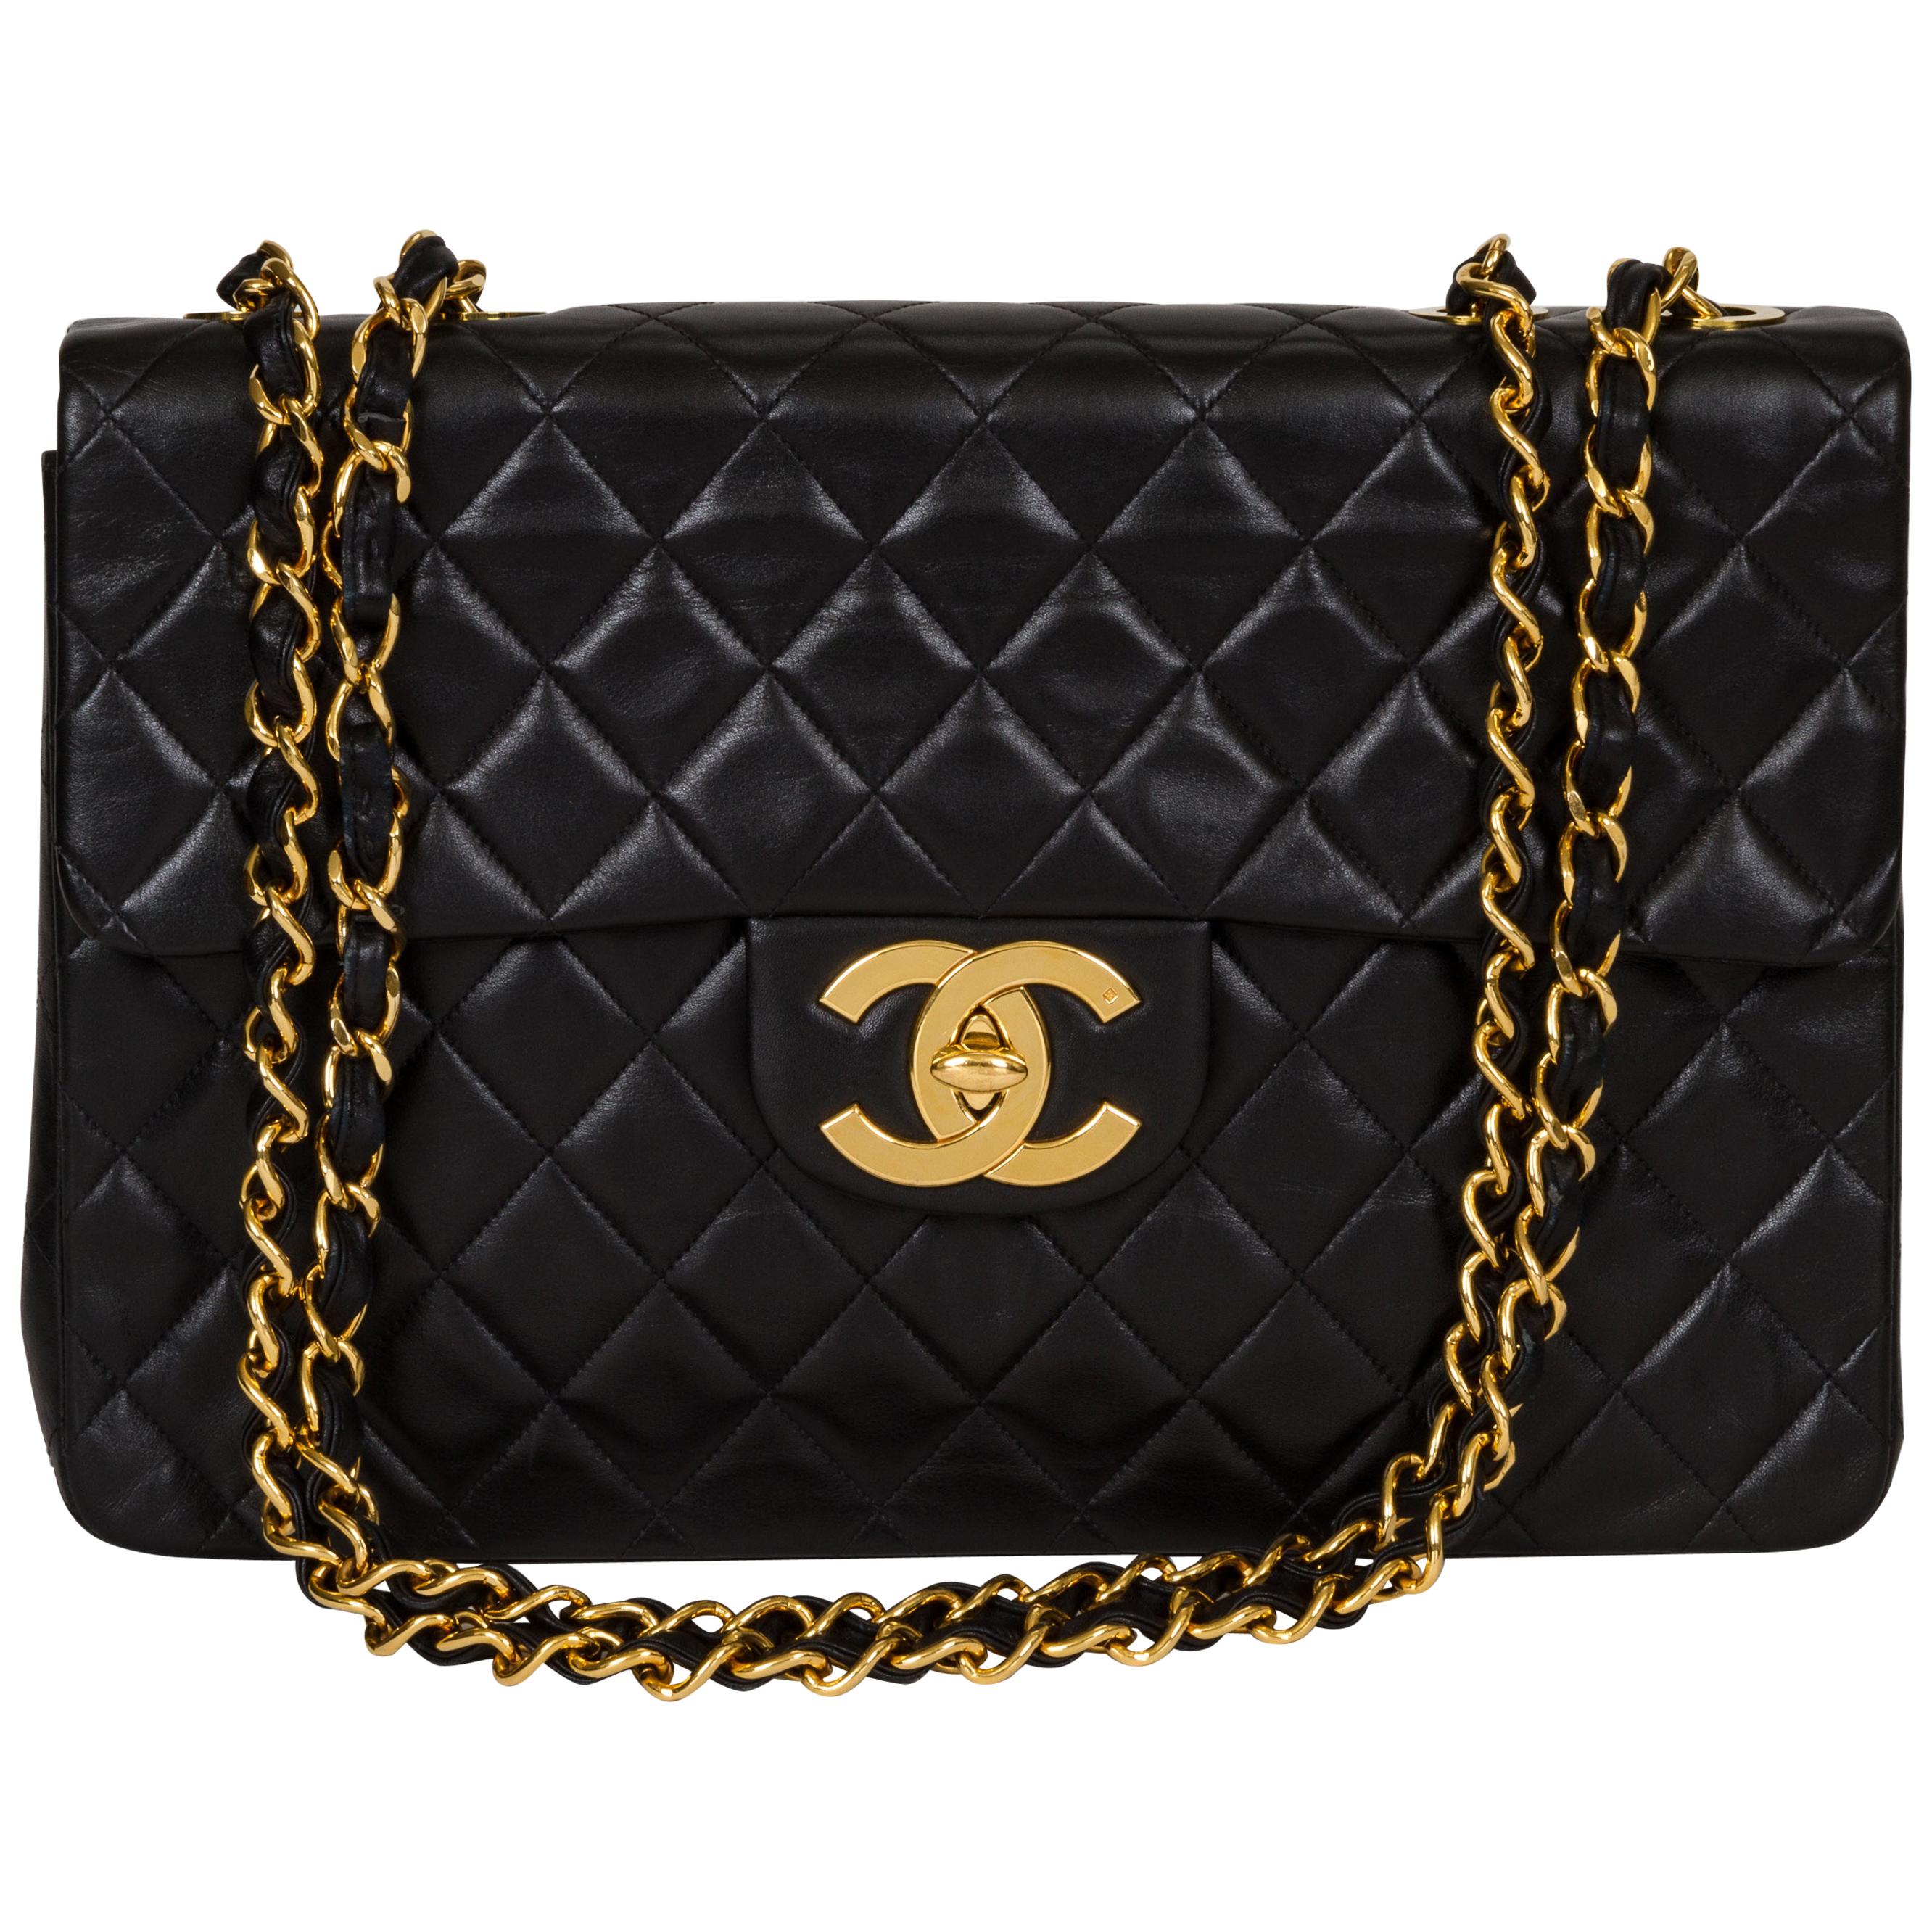 Vintage Chanel Black Quilted Jumbo Classic Flap Bag